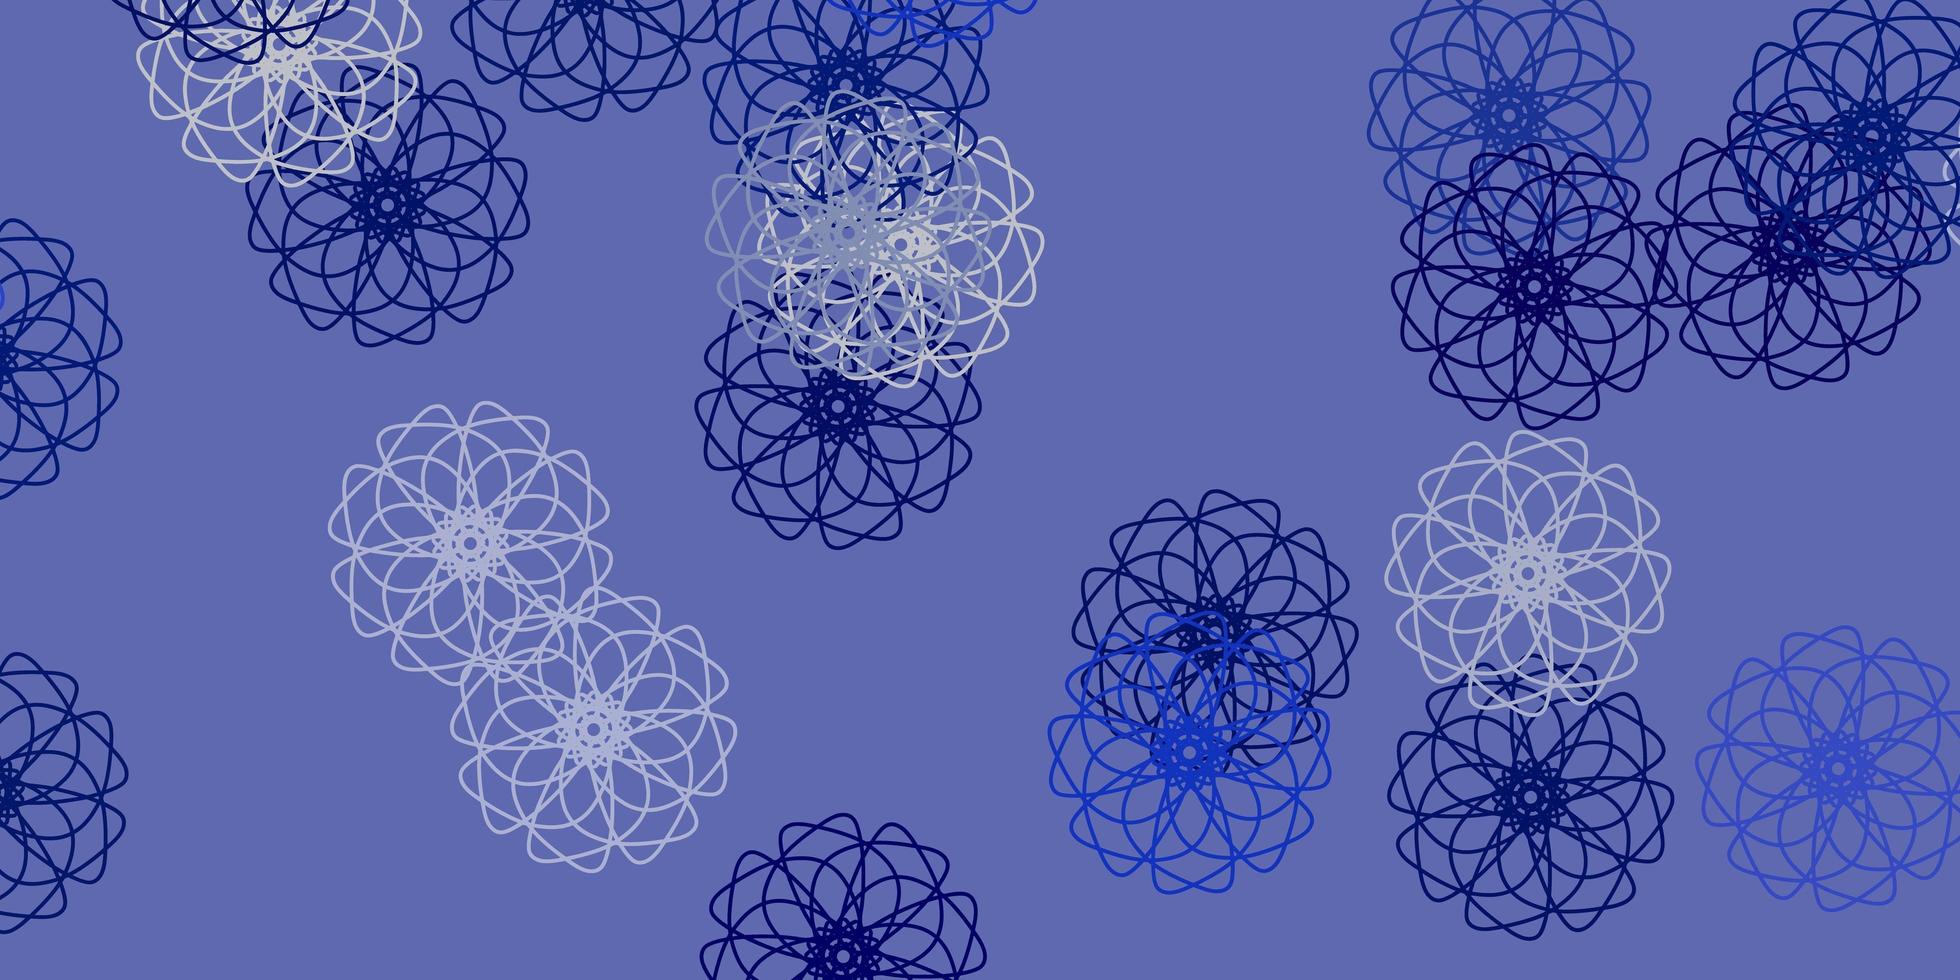 Light blue vector doodle pattern with flowers.